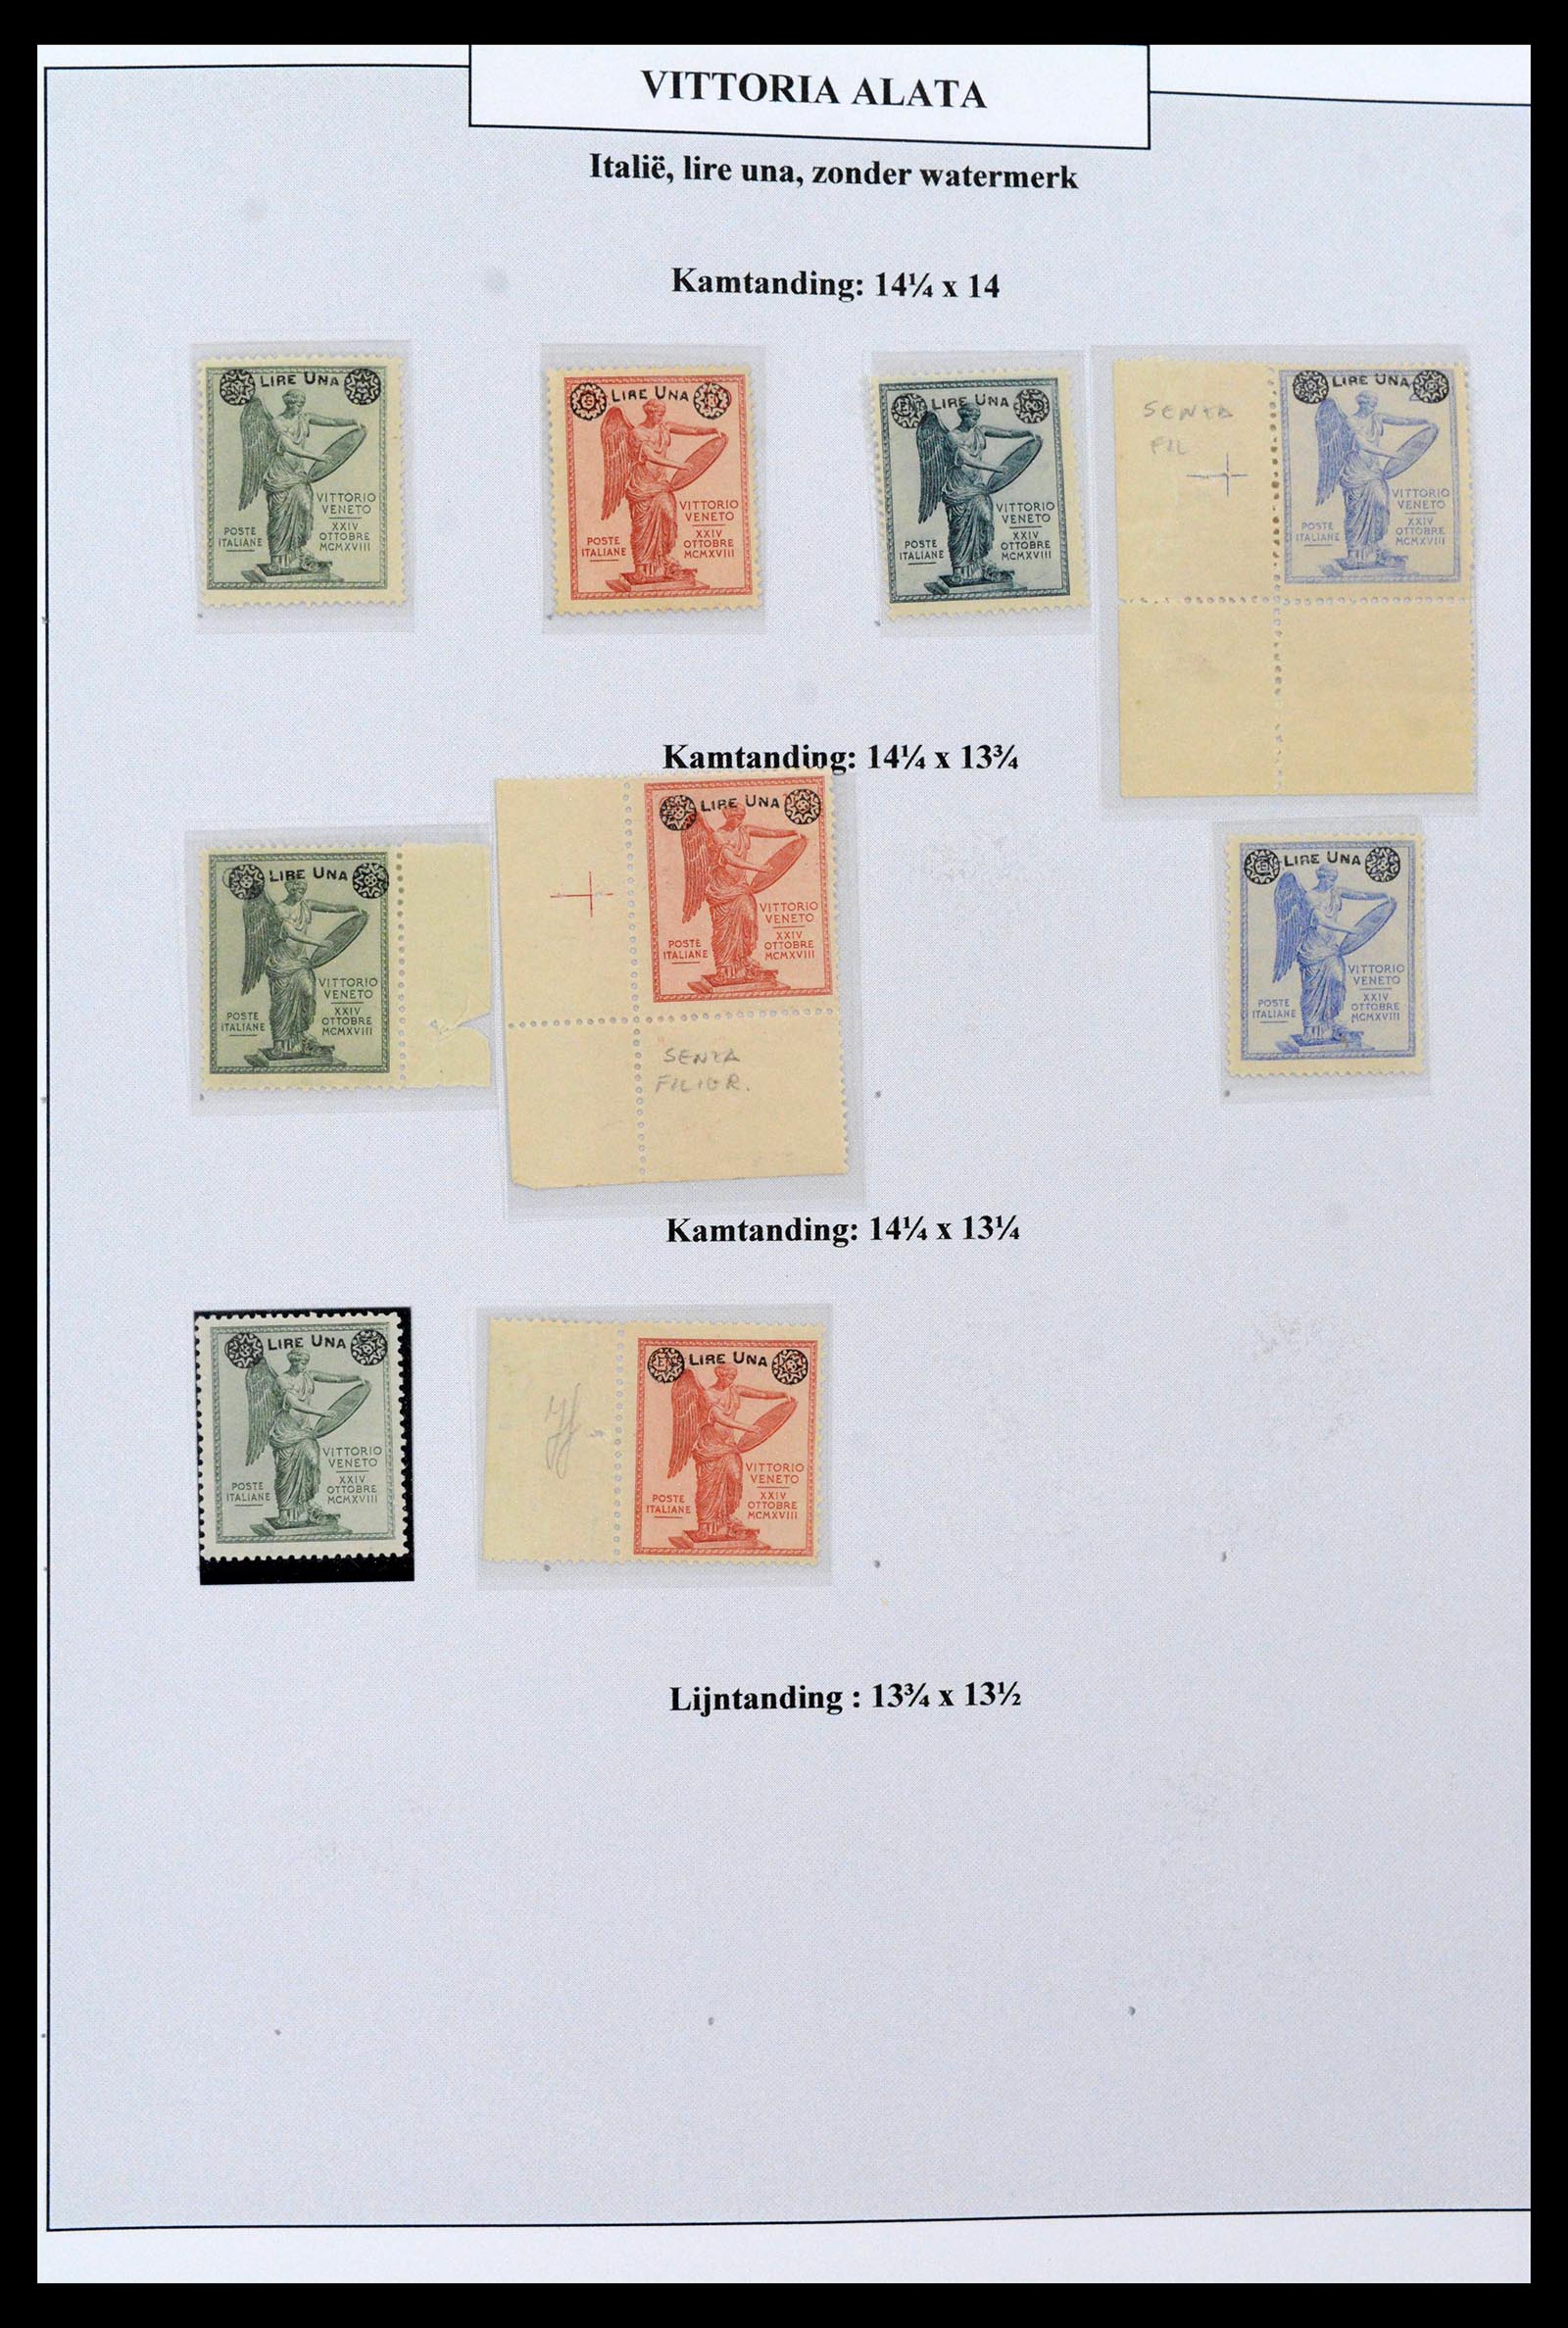 38515 0028 - Stamp collection 38515 Italy and colonies special collection Vittorio 19